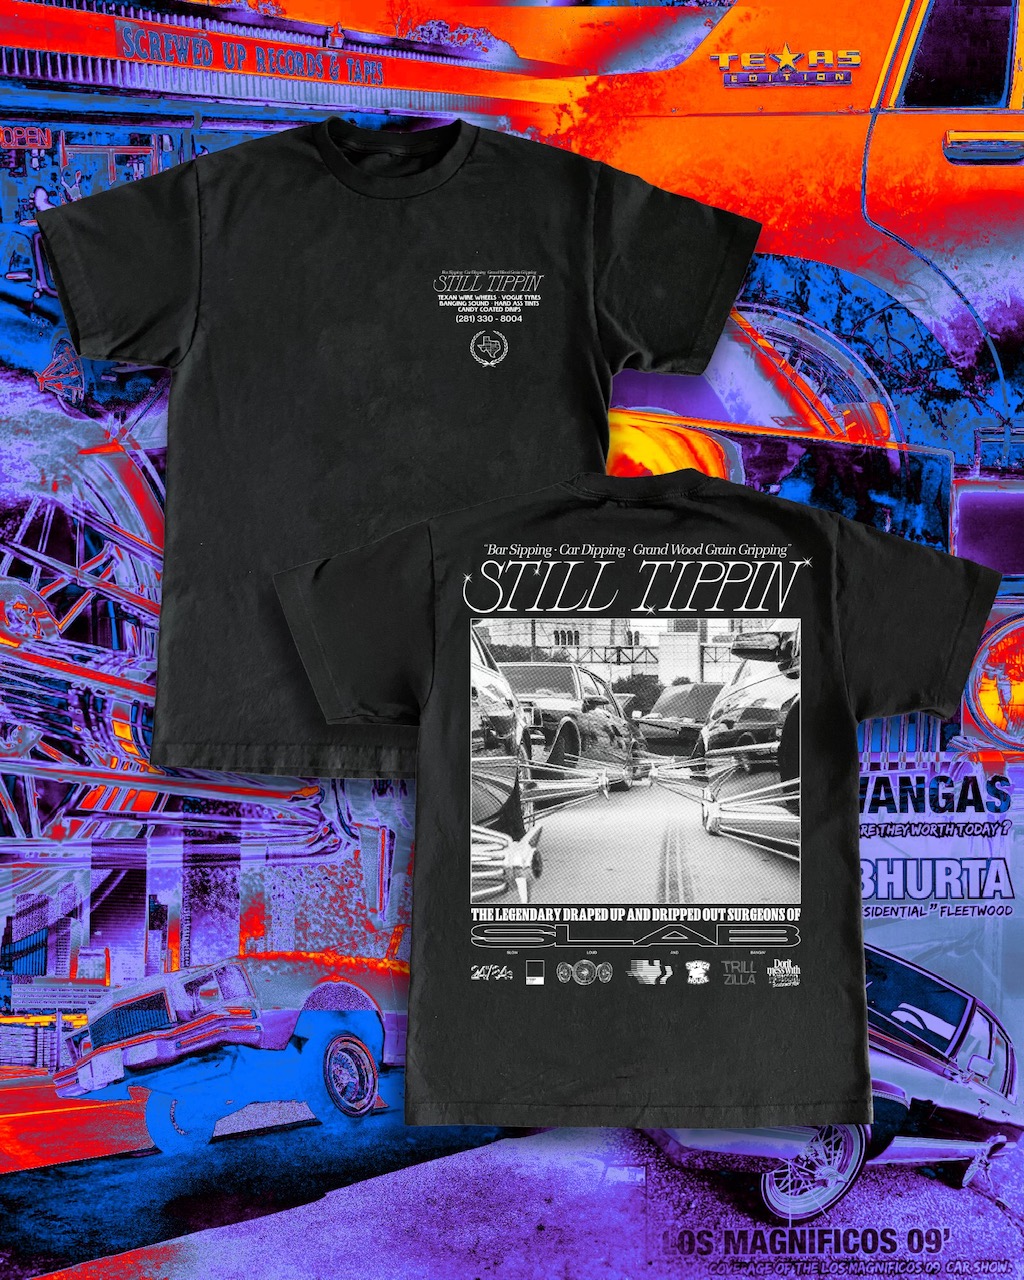 SGLD® on X: the third installment for the still tippin t-shirt series.  this one's a love letter to the chopped & screwed tapes, candy paints  and ridin clean. cop it at @FSGprints